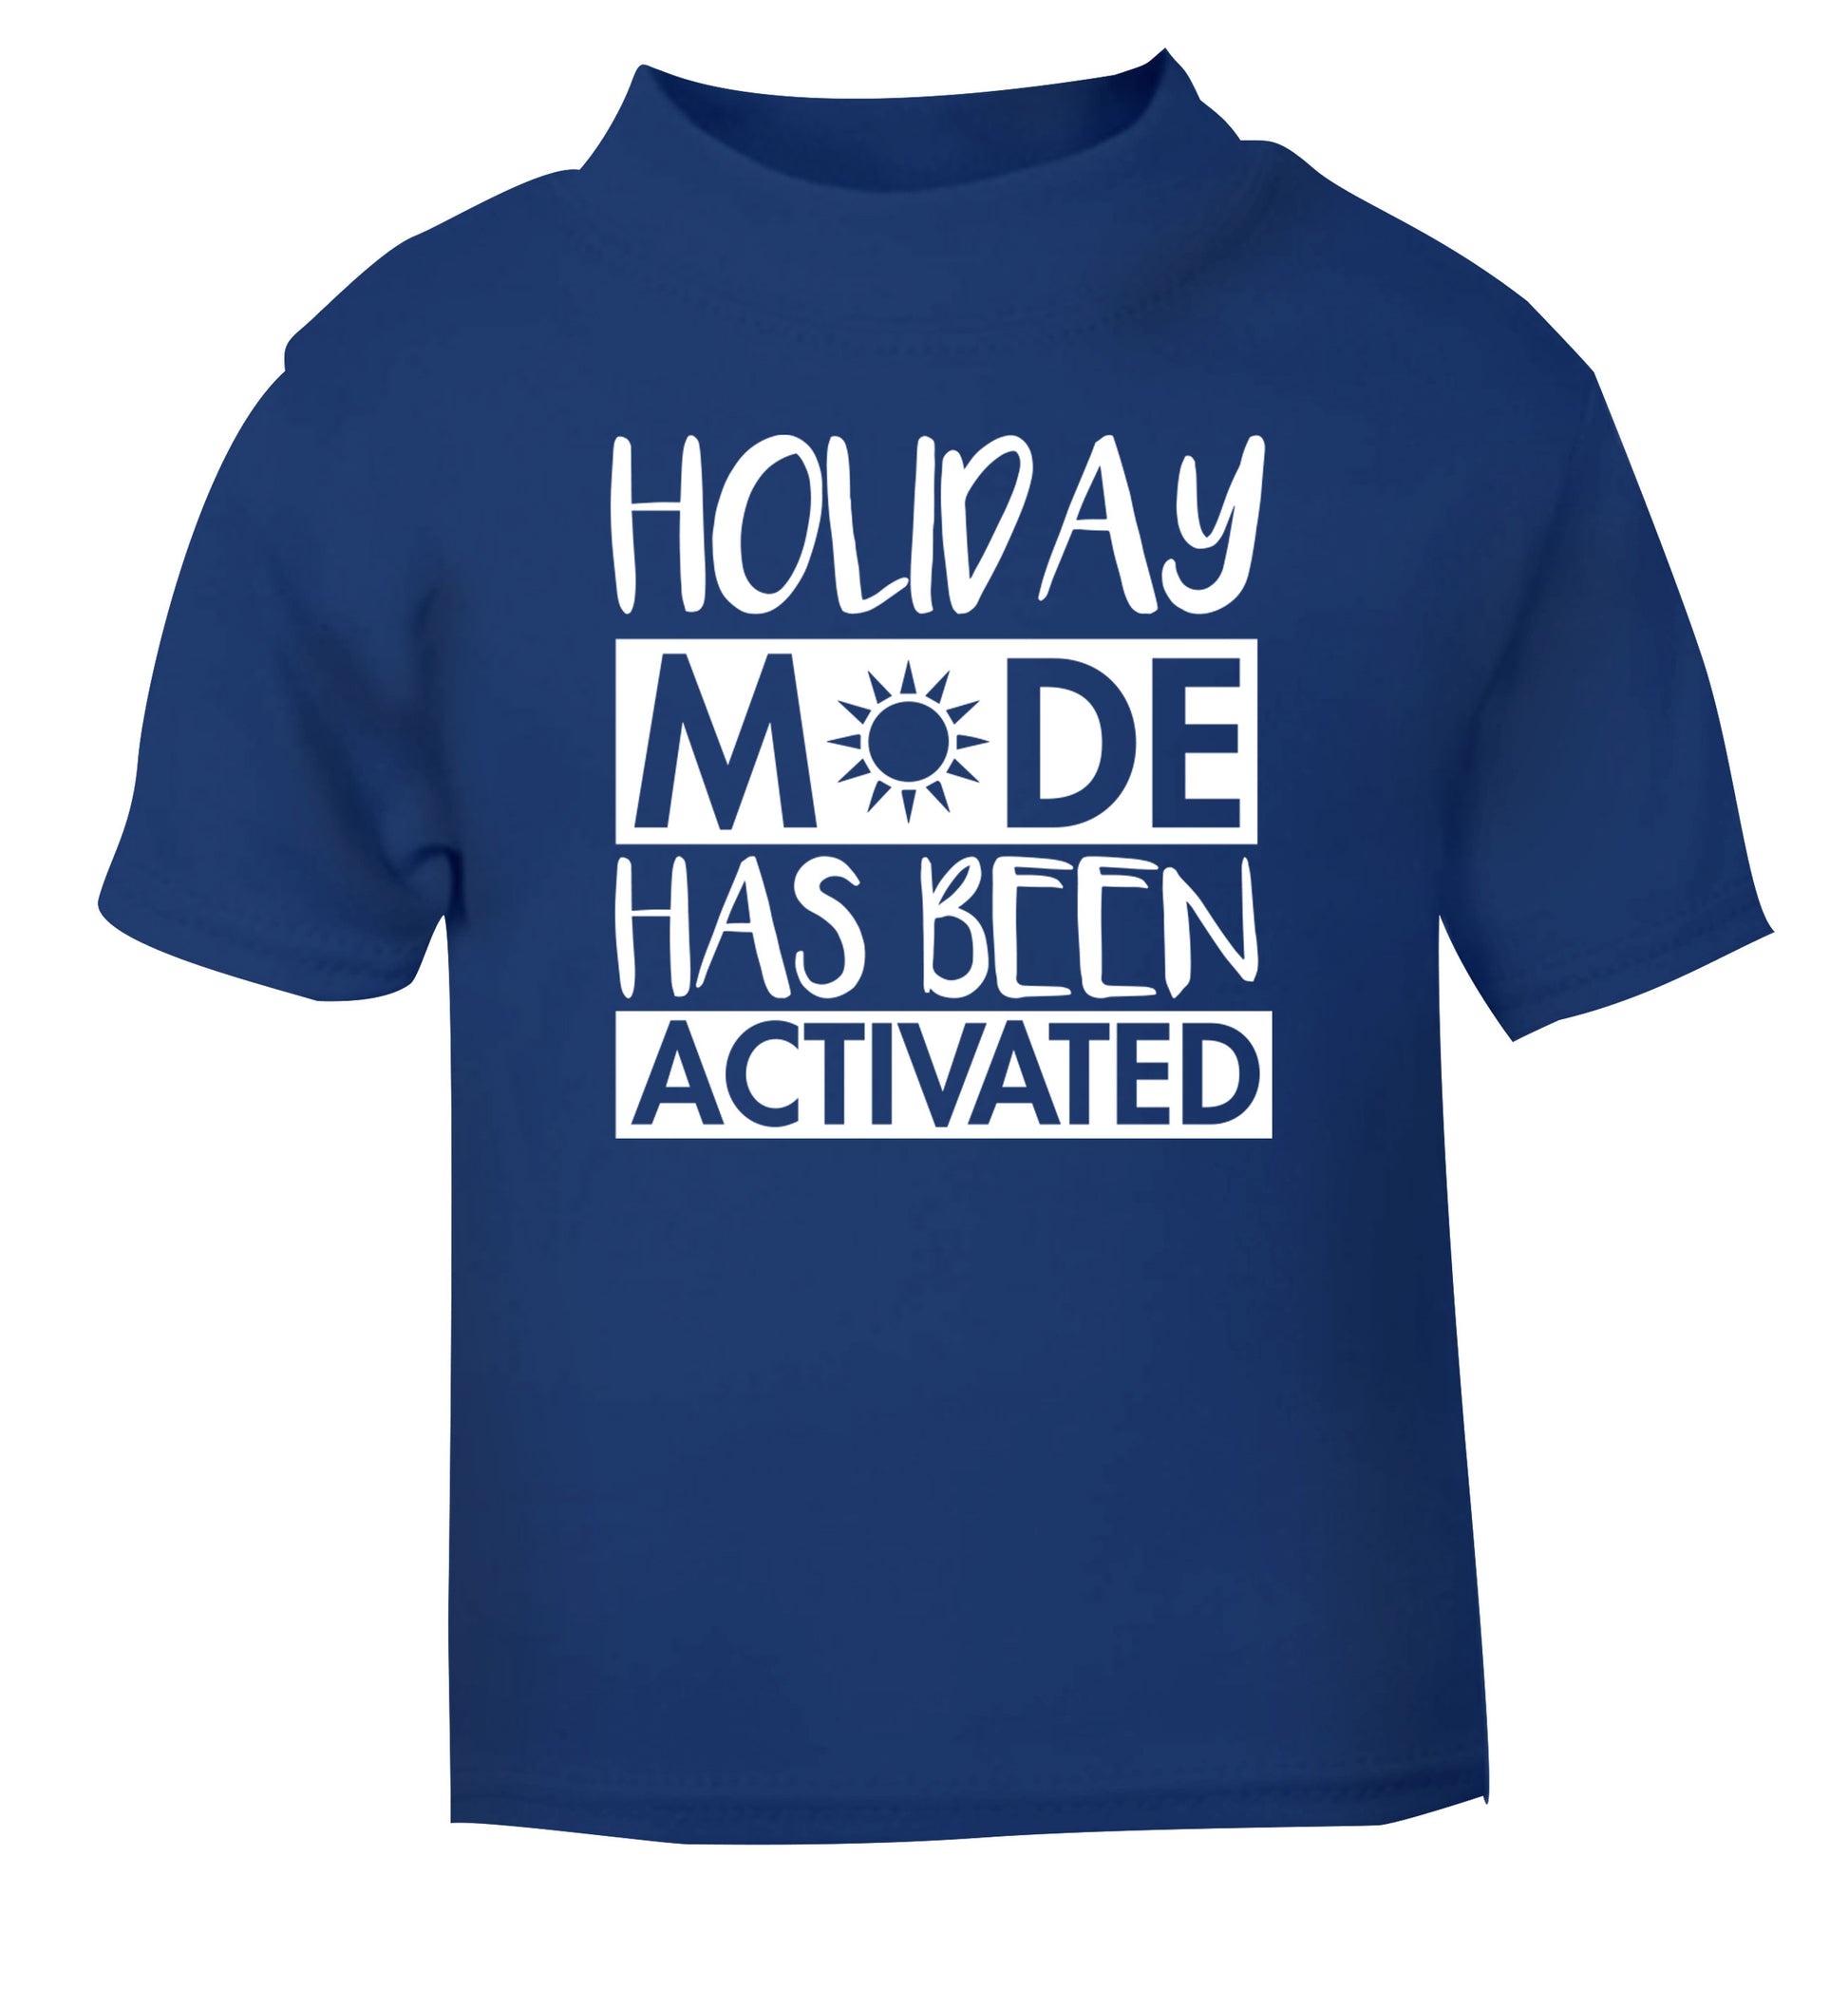 Holiday mode has been activated blue Baby Toddler Tshirt 2 Years